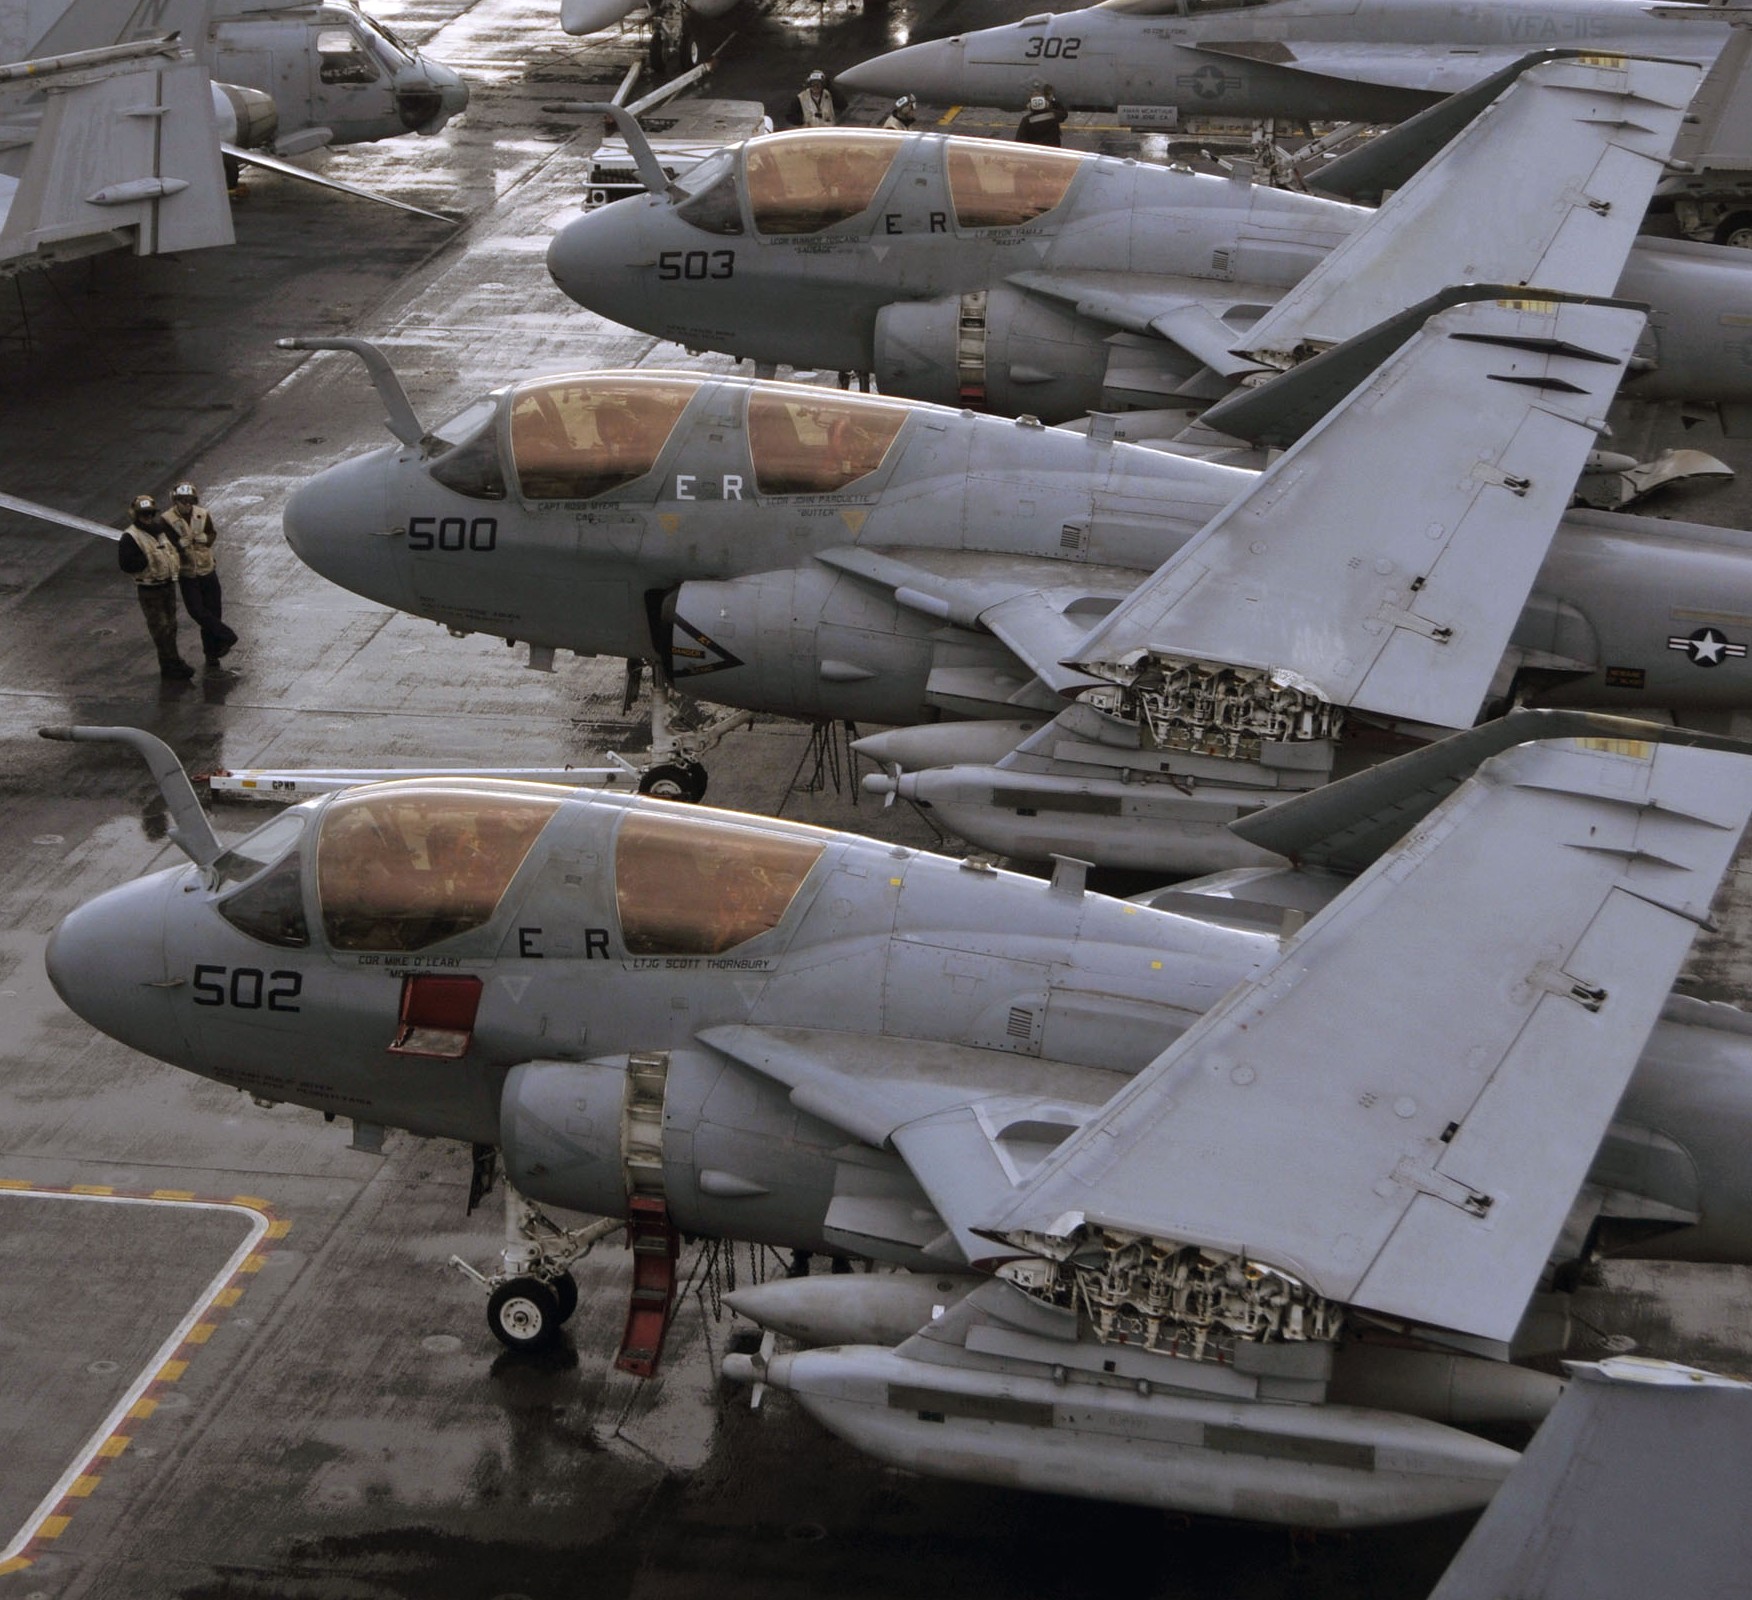 vaq-136 gauntlets electronic attack squadron vaqron us navy ea-6b prowler carrier air wing cvw-5 uss george washington cvn-73 136